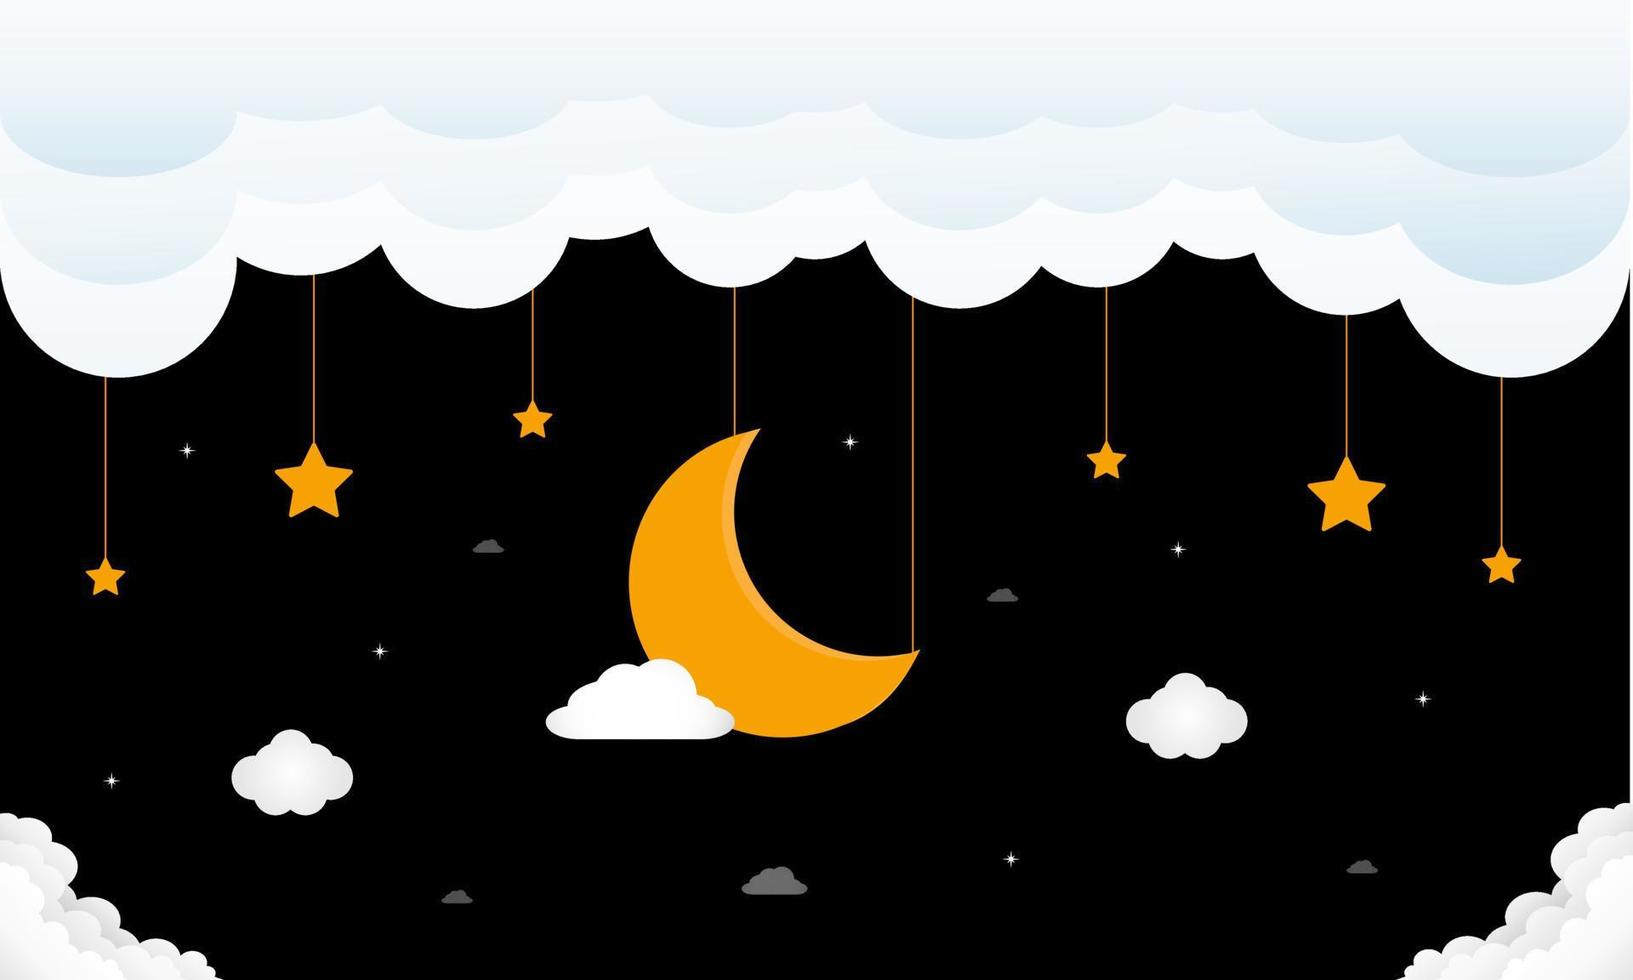 Sweet dreams. Crescent moon, clouds and stars on black night background. Vector illustration.